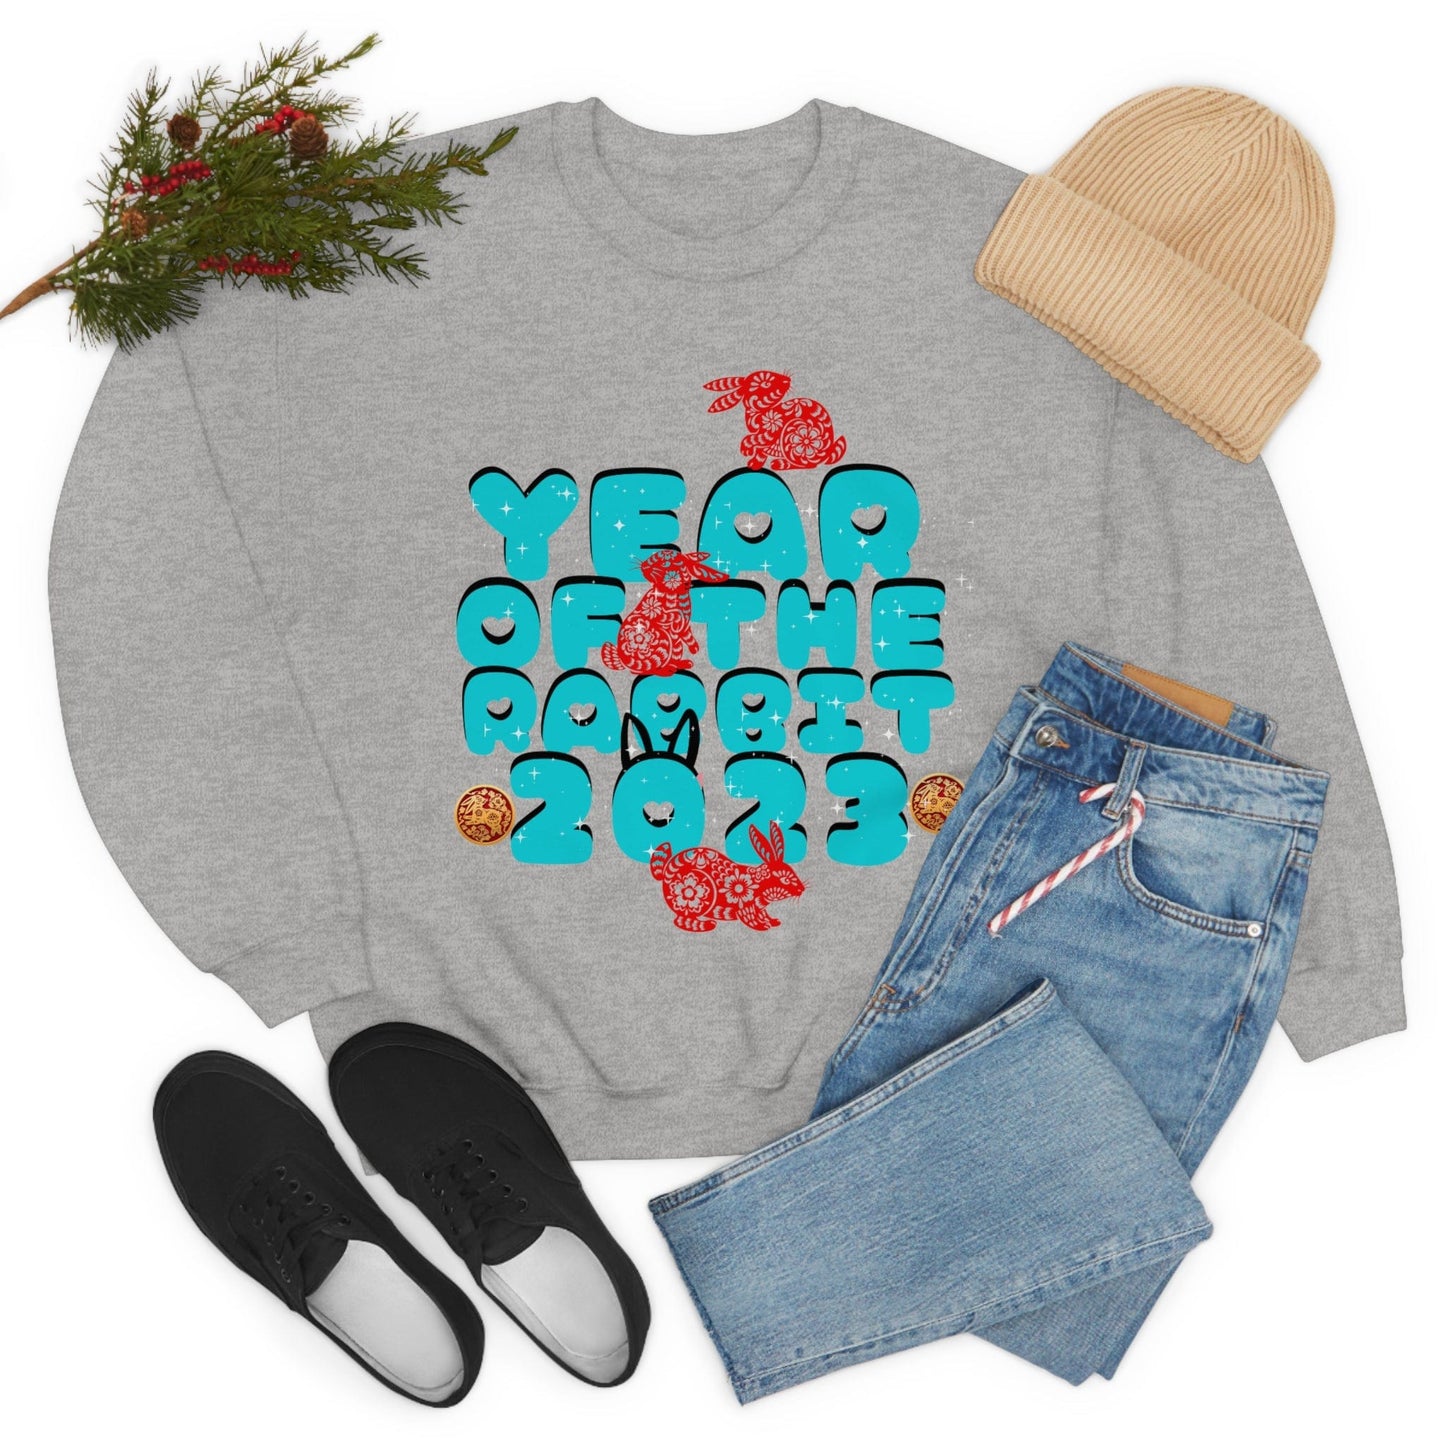 Year of The Rabbit 2023 Sweatshirt, New Year's Eve 2023 Sweatshirt for Women, Retro New Year Sweater, Chinese Rabbit, Lunar New Year Party Gifts